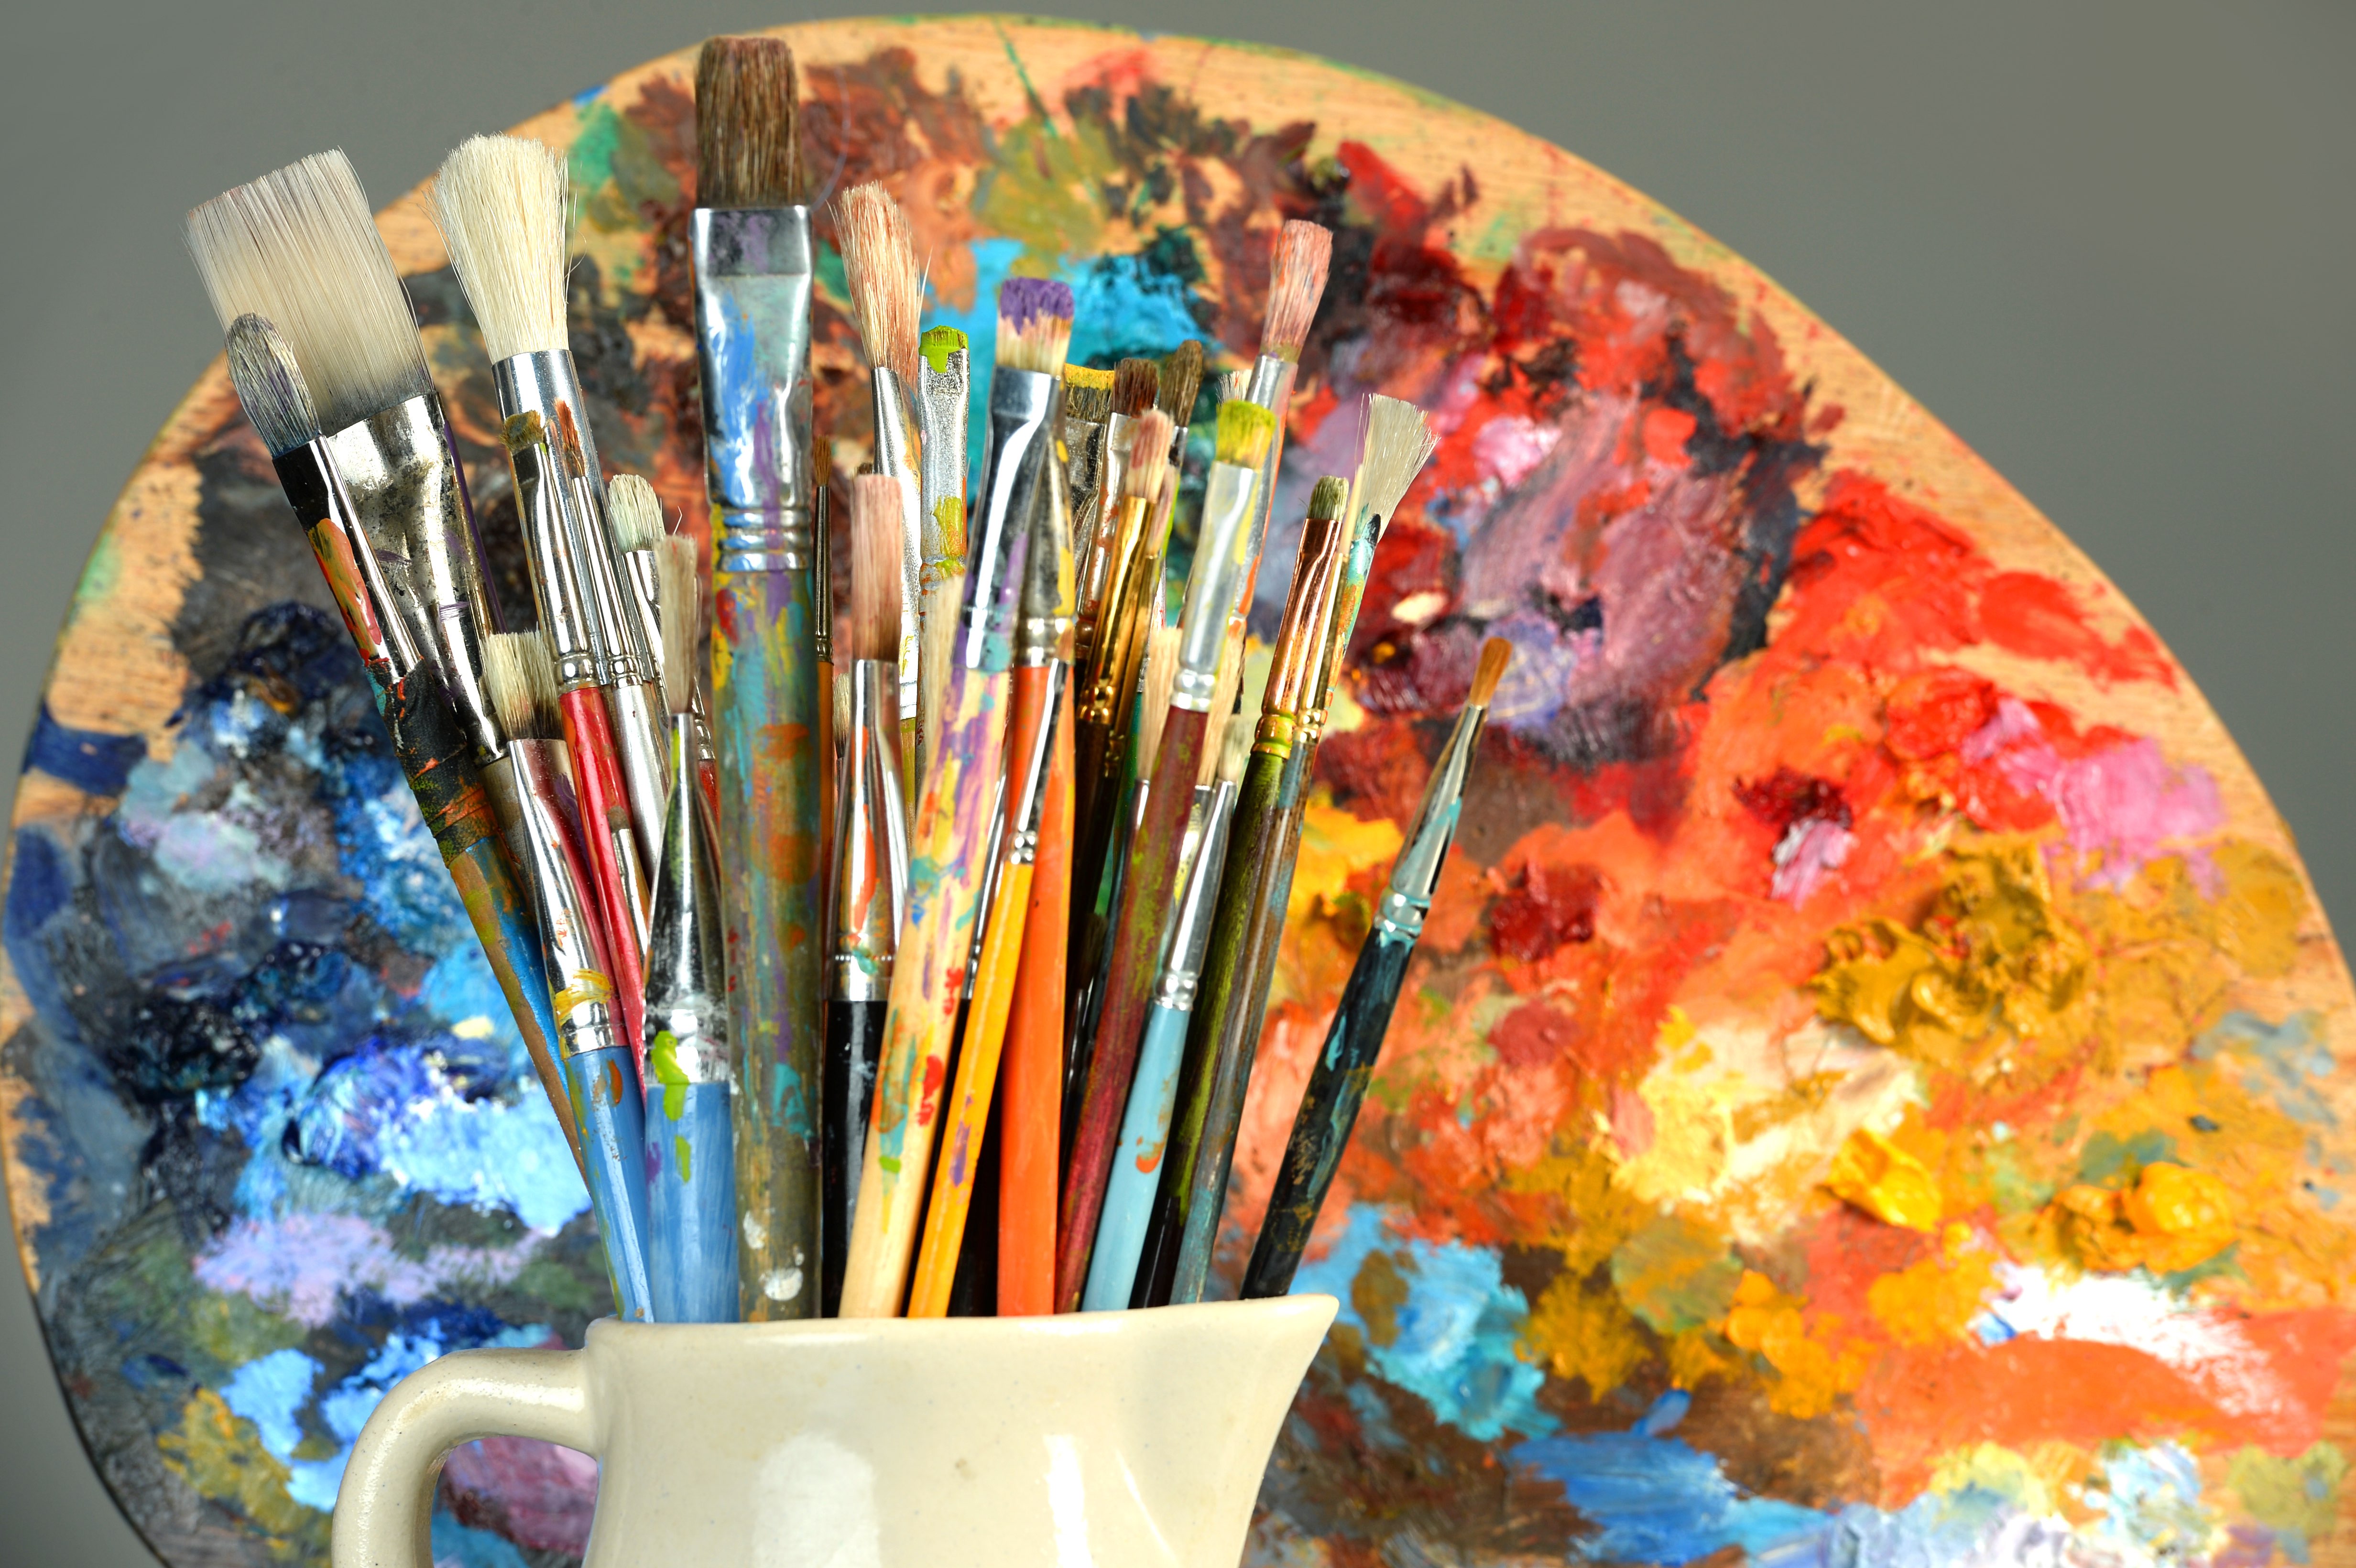 Paintbrushes and palette over gray background